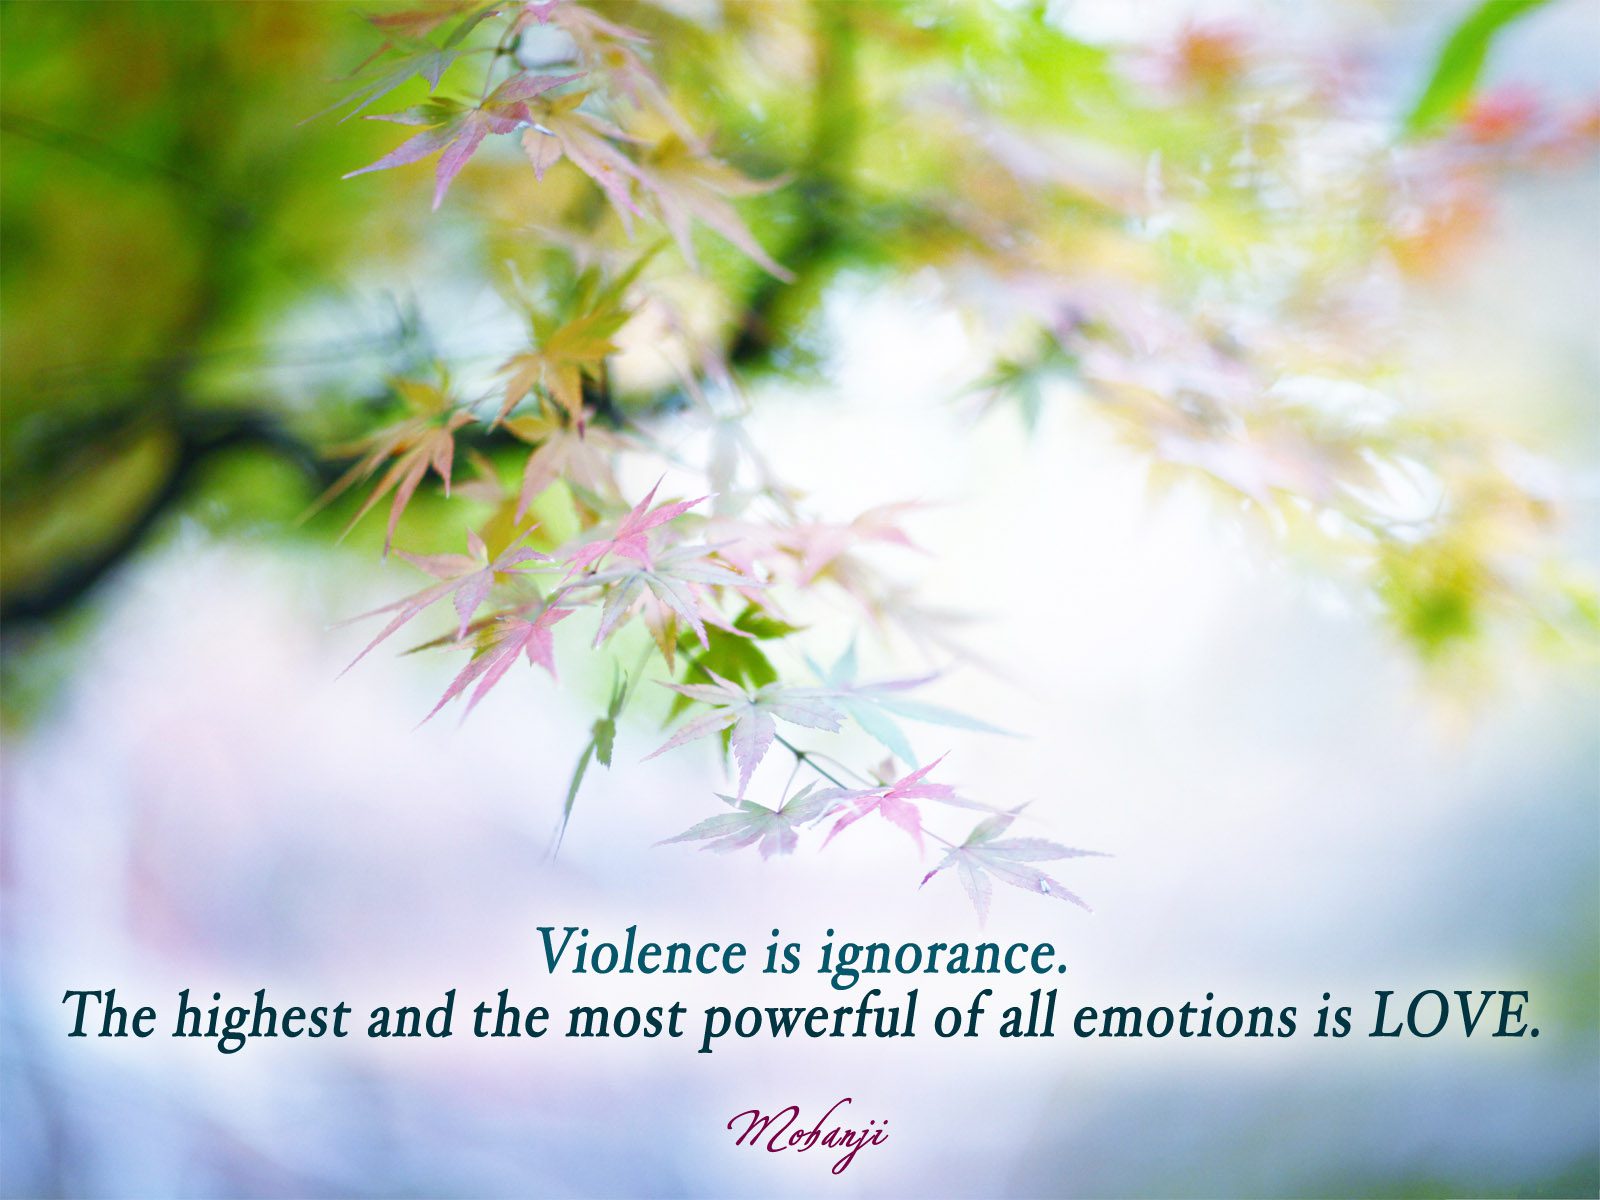 Mohanji quote - Violence is ignorance